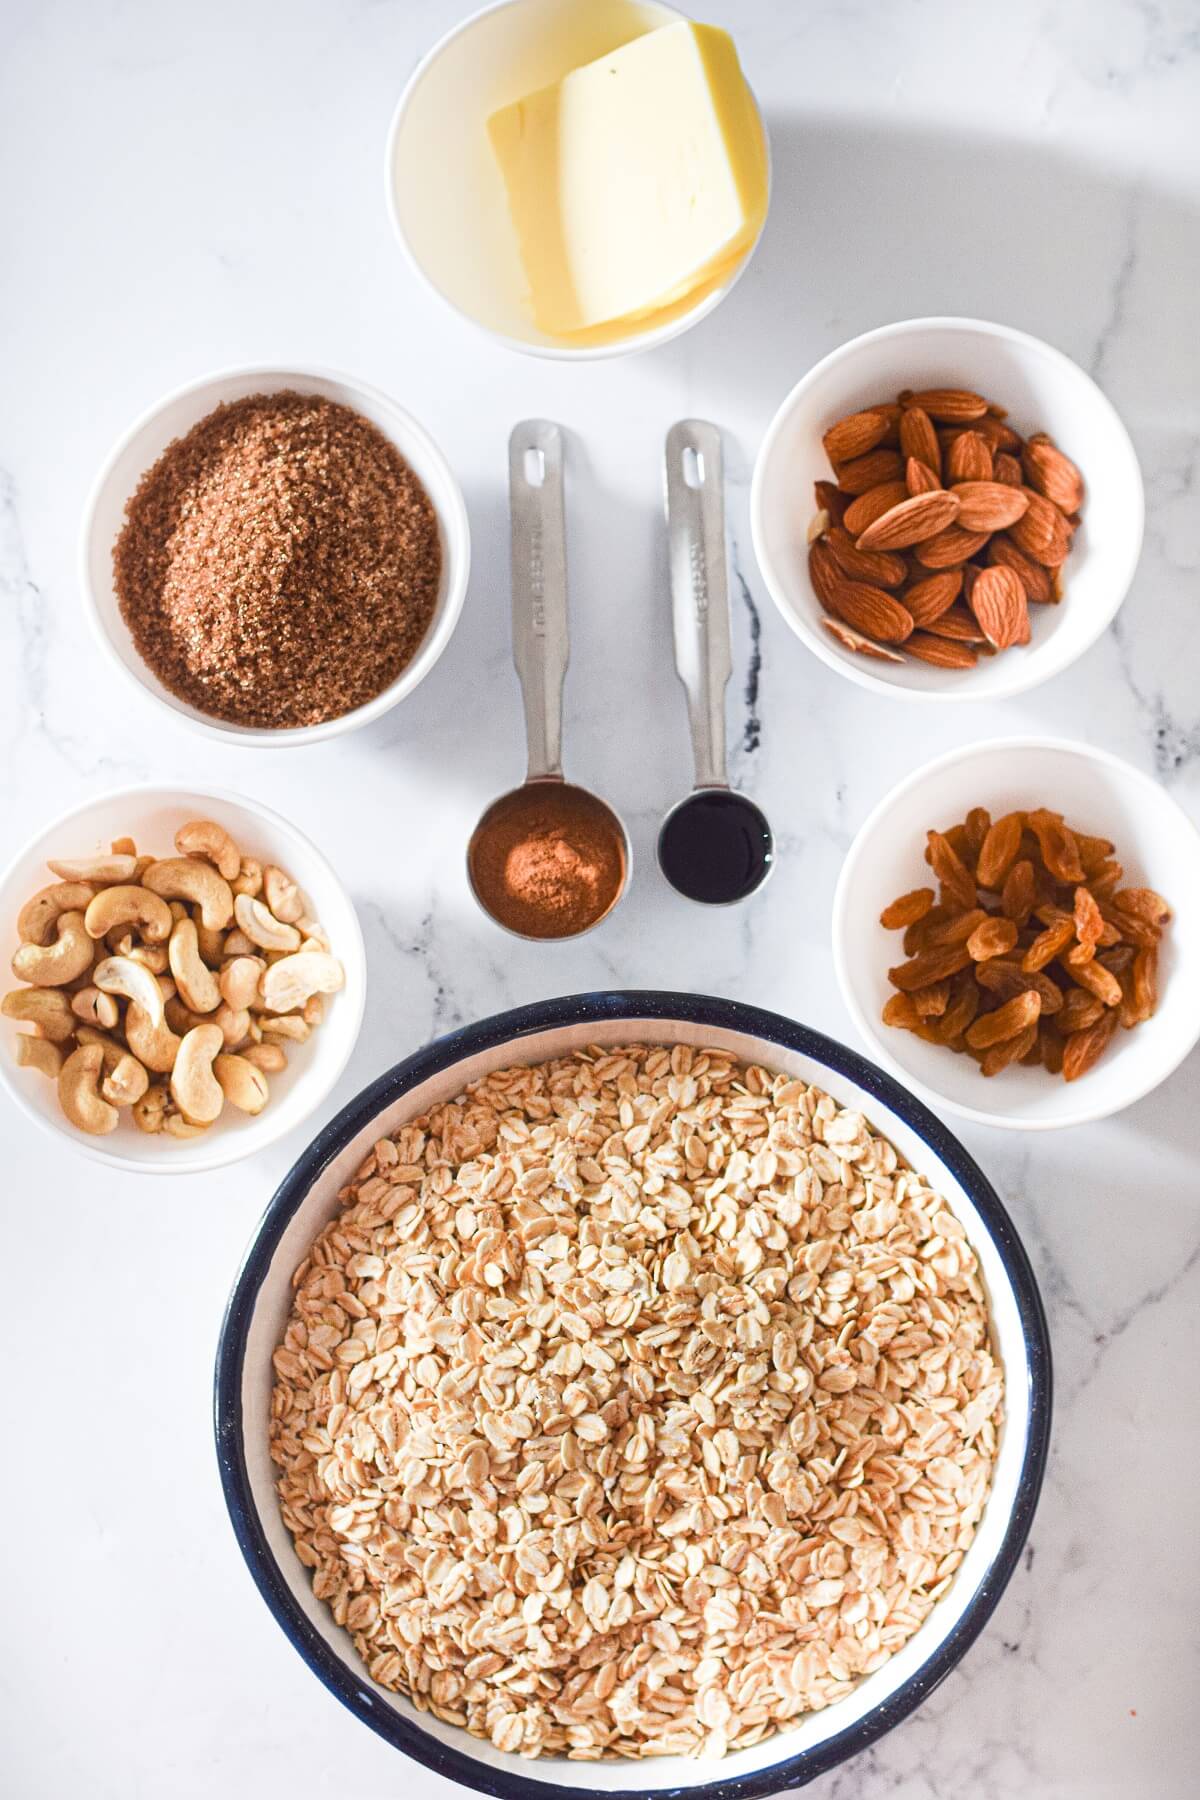 Brown Butter Nutty Granola Recipe - More Dollar$$ at Home